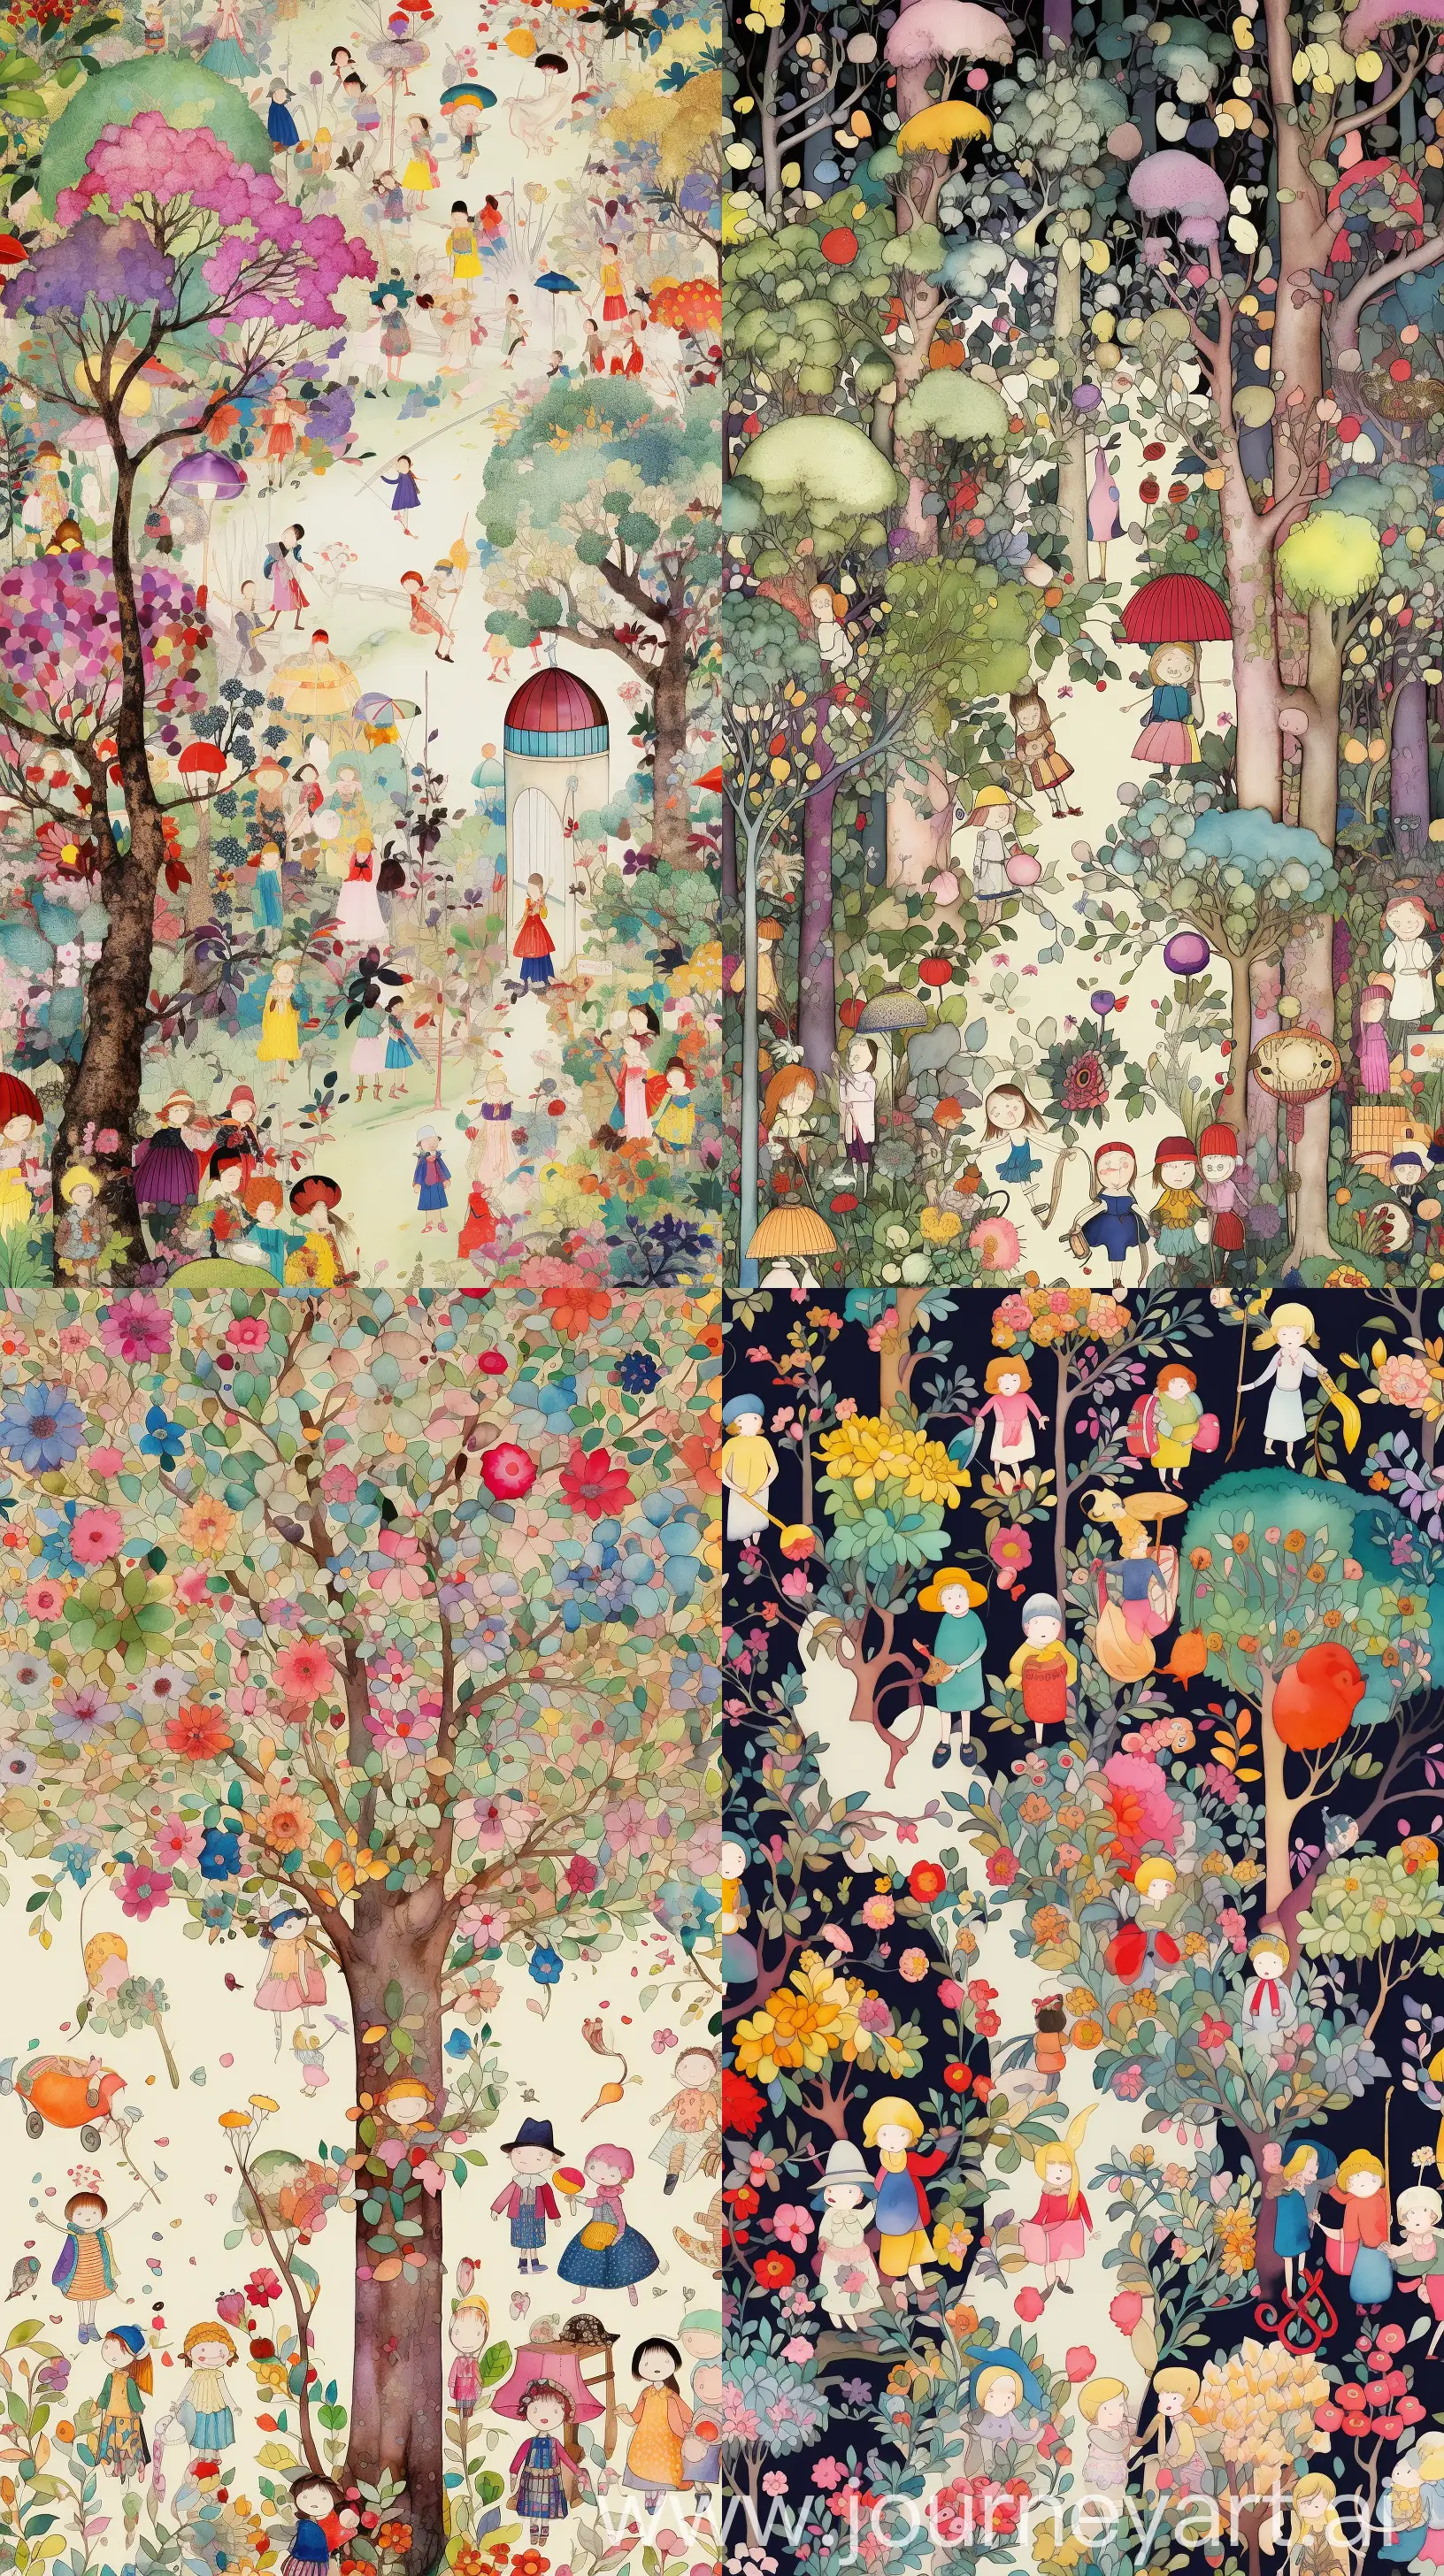 Create a whimsical wallpaper in the style of Henry Darger, featuring the Vivian Girls in an enchanted forest. The scene is full of otherworldly flora and fauna with a vibrant color palette that brings the mystical world to life. The art should be both captivating and serene, ideal for a phone wallpaper that invites the viewer into a Darger-esque fantasy. --ar 9:16 --v 5.2